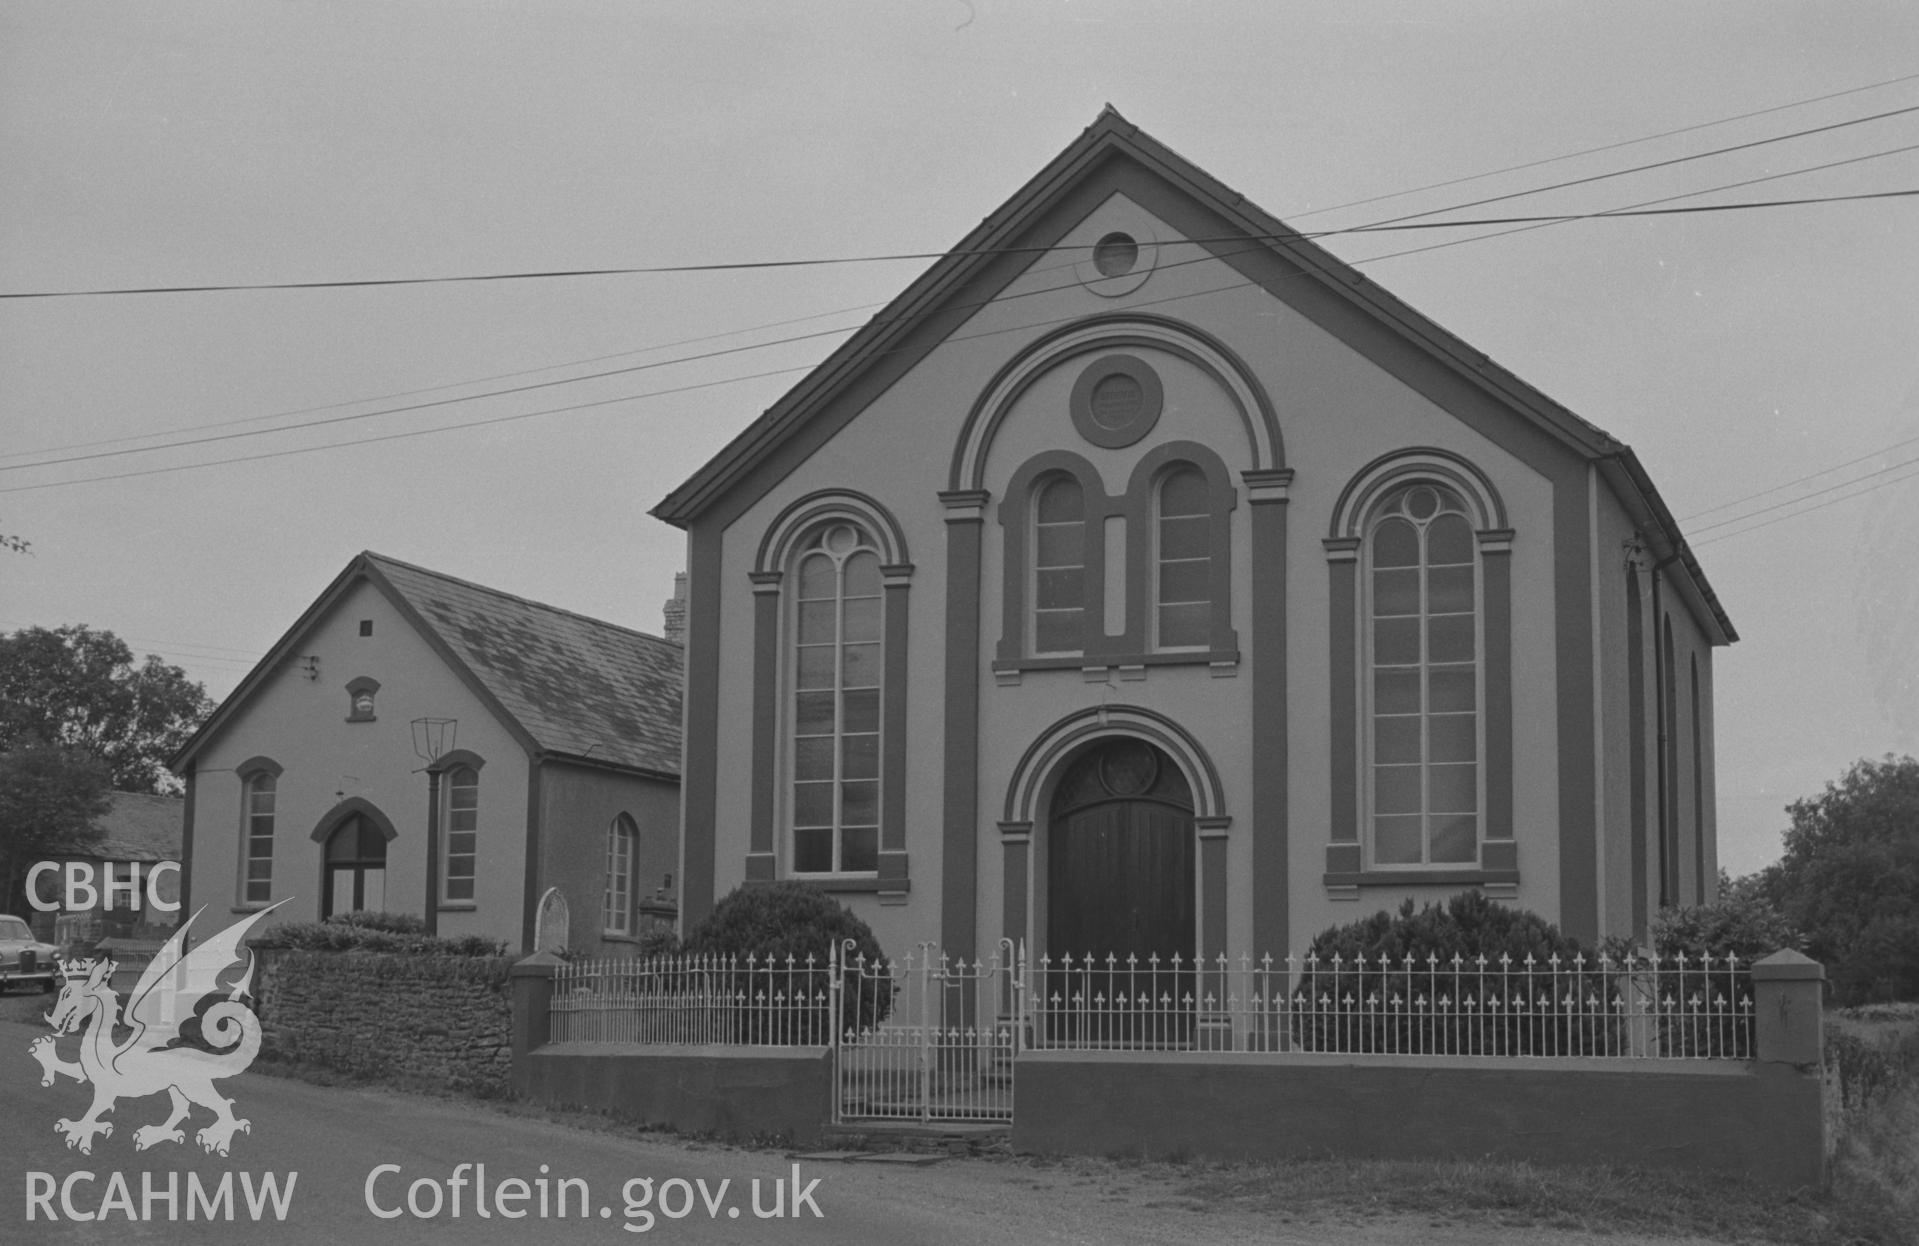 Digital copy of black & white negative showing Bryngwyn Independent Chapel and school house at crossroads 1.7km south east of Beulah. Photographed by Arthur O. Chater on 7th September 1966 looking north north east from Grid Reference SN 300 449.